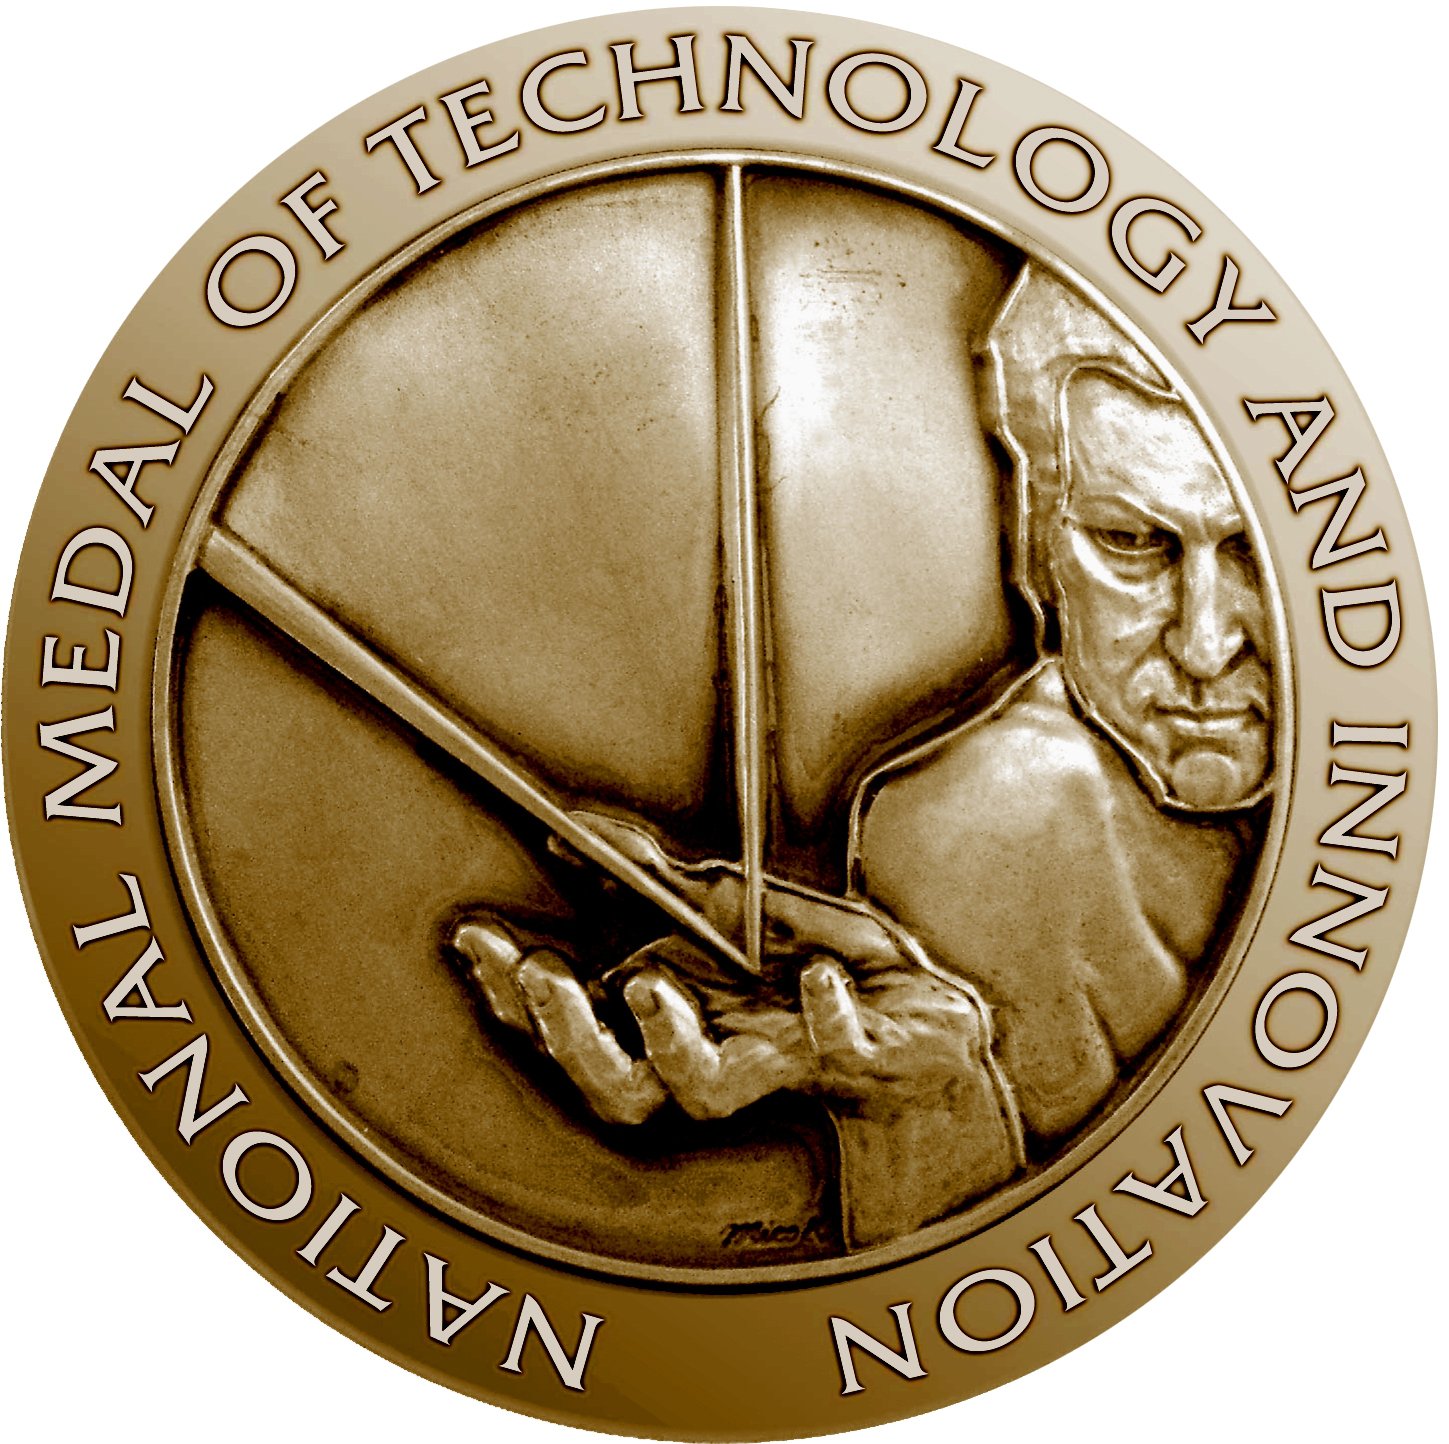 Medal image reads "National Medal of Technology and Innovation"